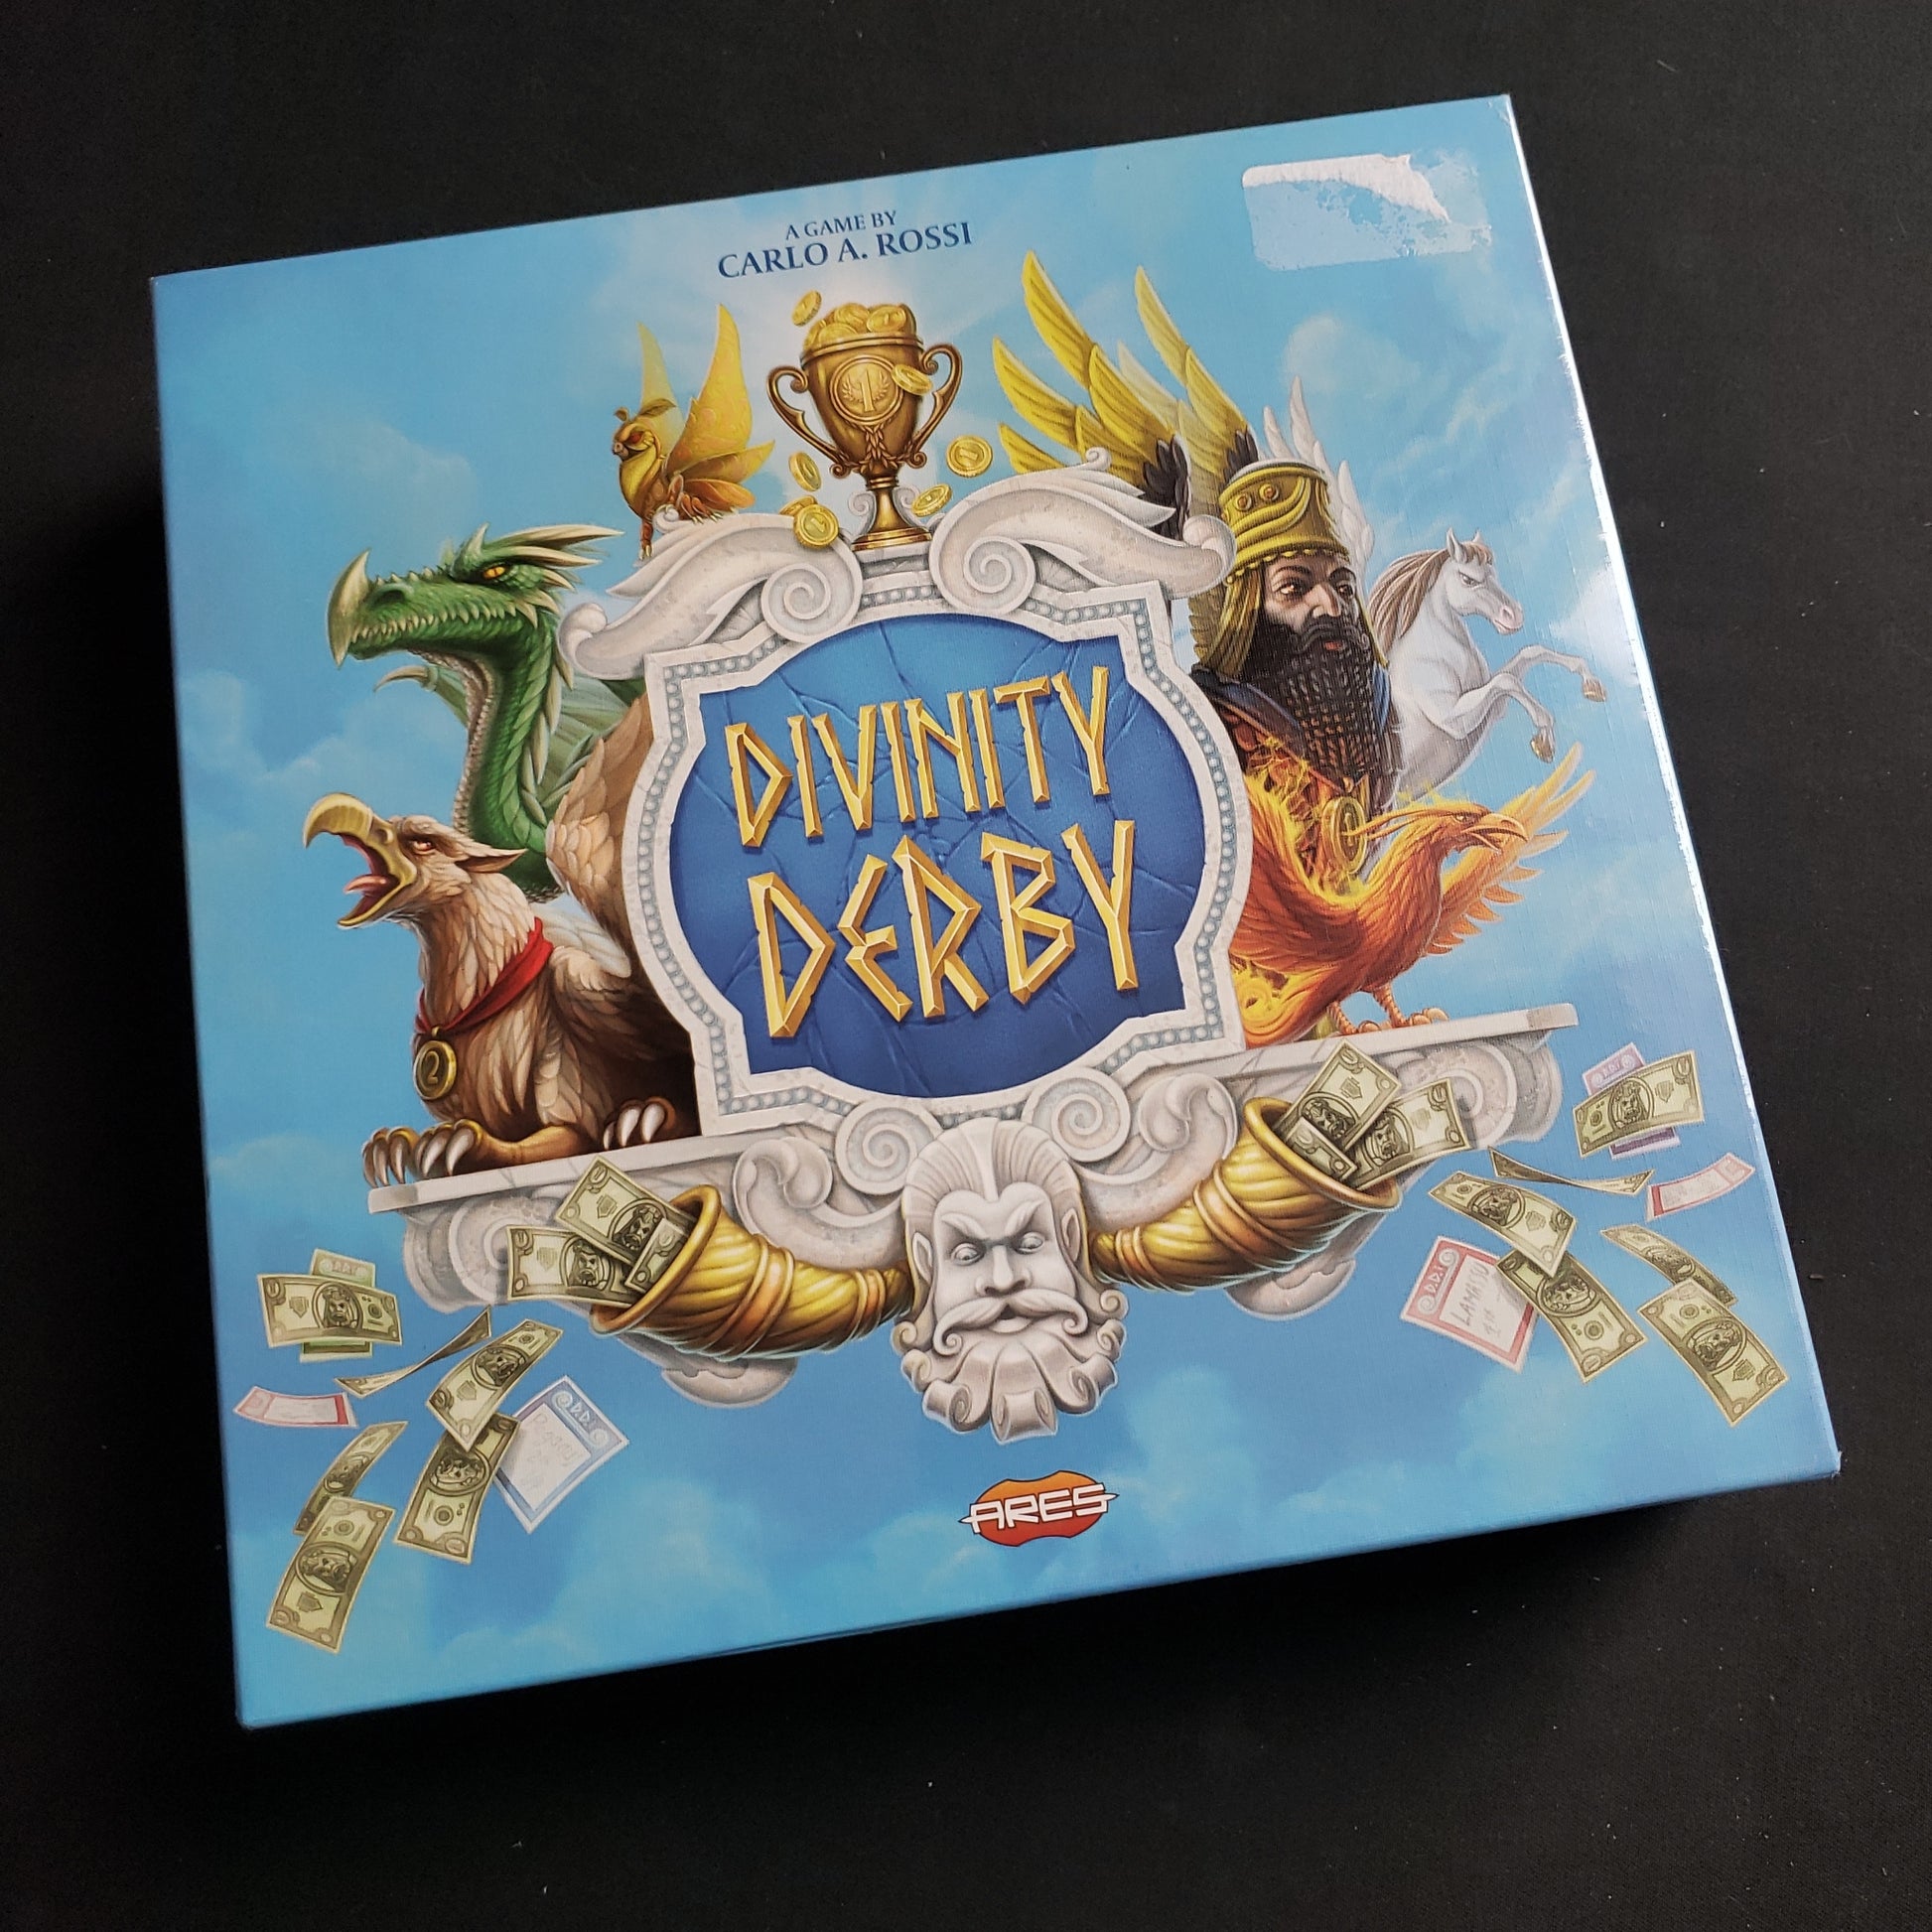 Image shows the front cover of the box of the Divinity Derby board game